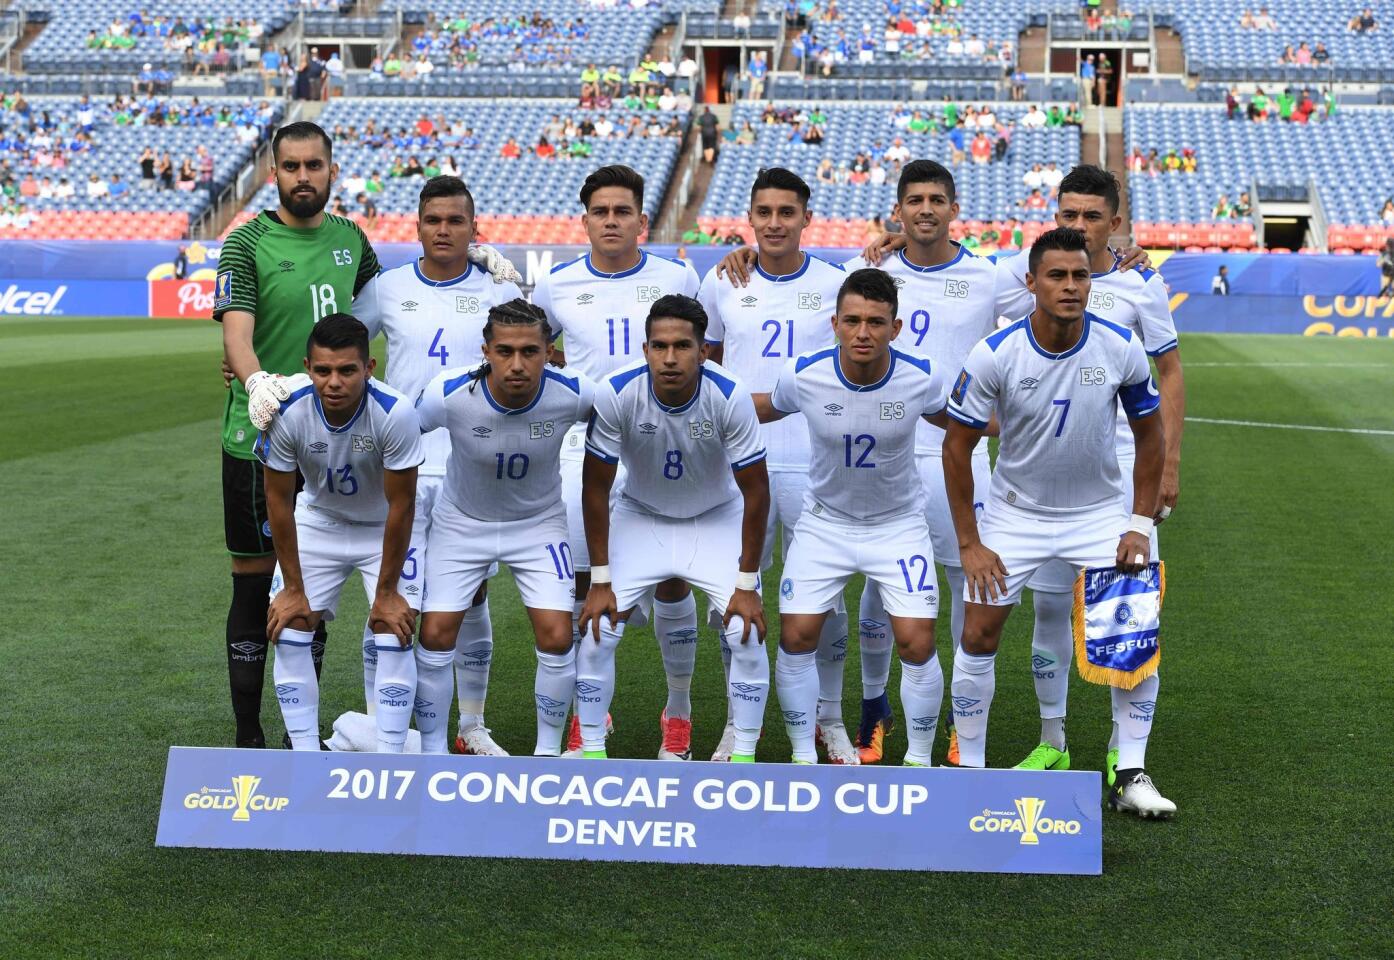 El Salvador team members pose for a photo before the El Salvador vs Curacao CONCACAF Group C Gold Cup soccer game on July 13, 2017 at Sports Authority Field at Mile High in Denver, Colorado. / AFP PHOTO / MARK RALSTONMARK RALSTON/AFP/Getty Images ** OUTS - ELSENT, FPG, CM - OUTS * NM, PH, VA if sourced by CT, LA or MoD **